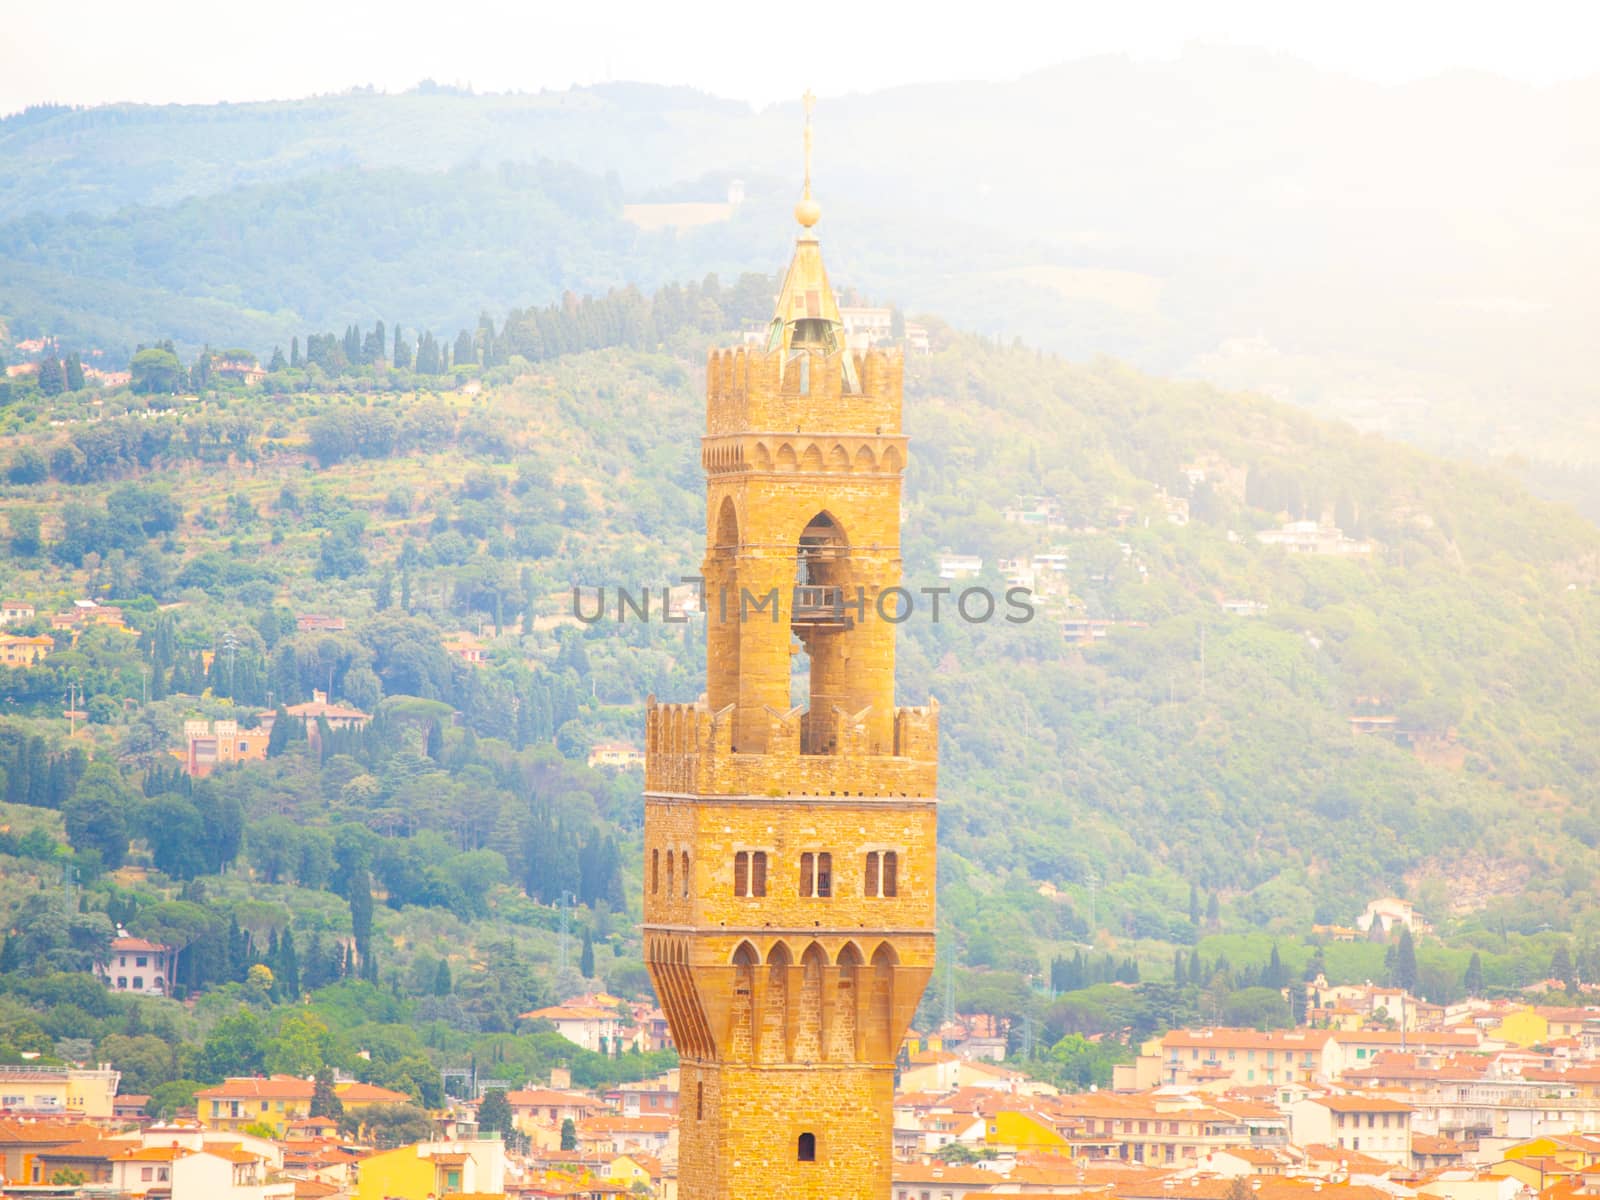 Detailed view of tower of Town Hall Palazzo Vecchio, or Palazzo della Signoria, Florence, Italy.